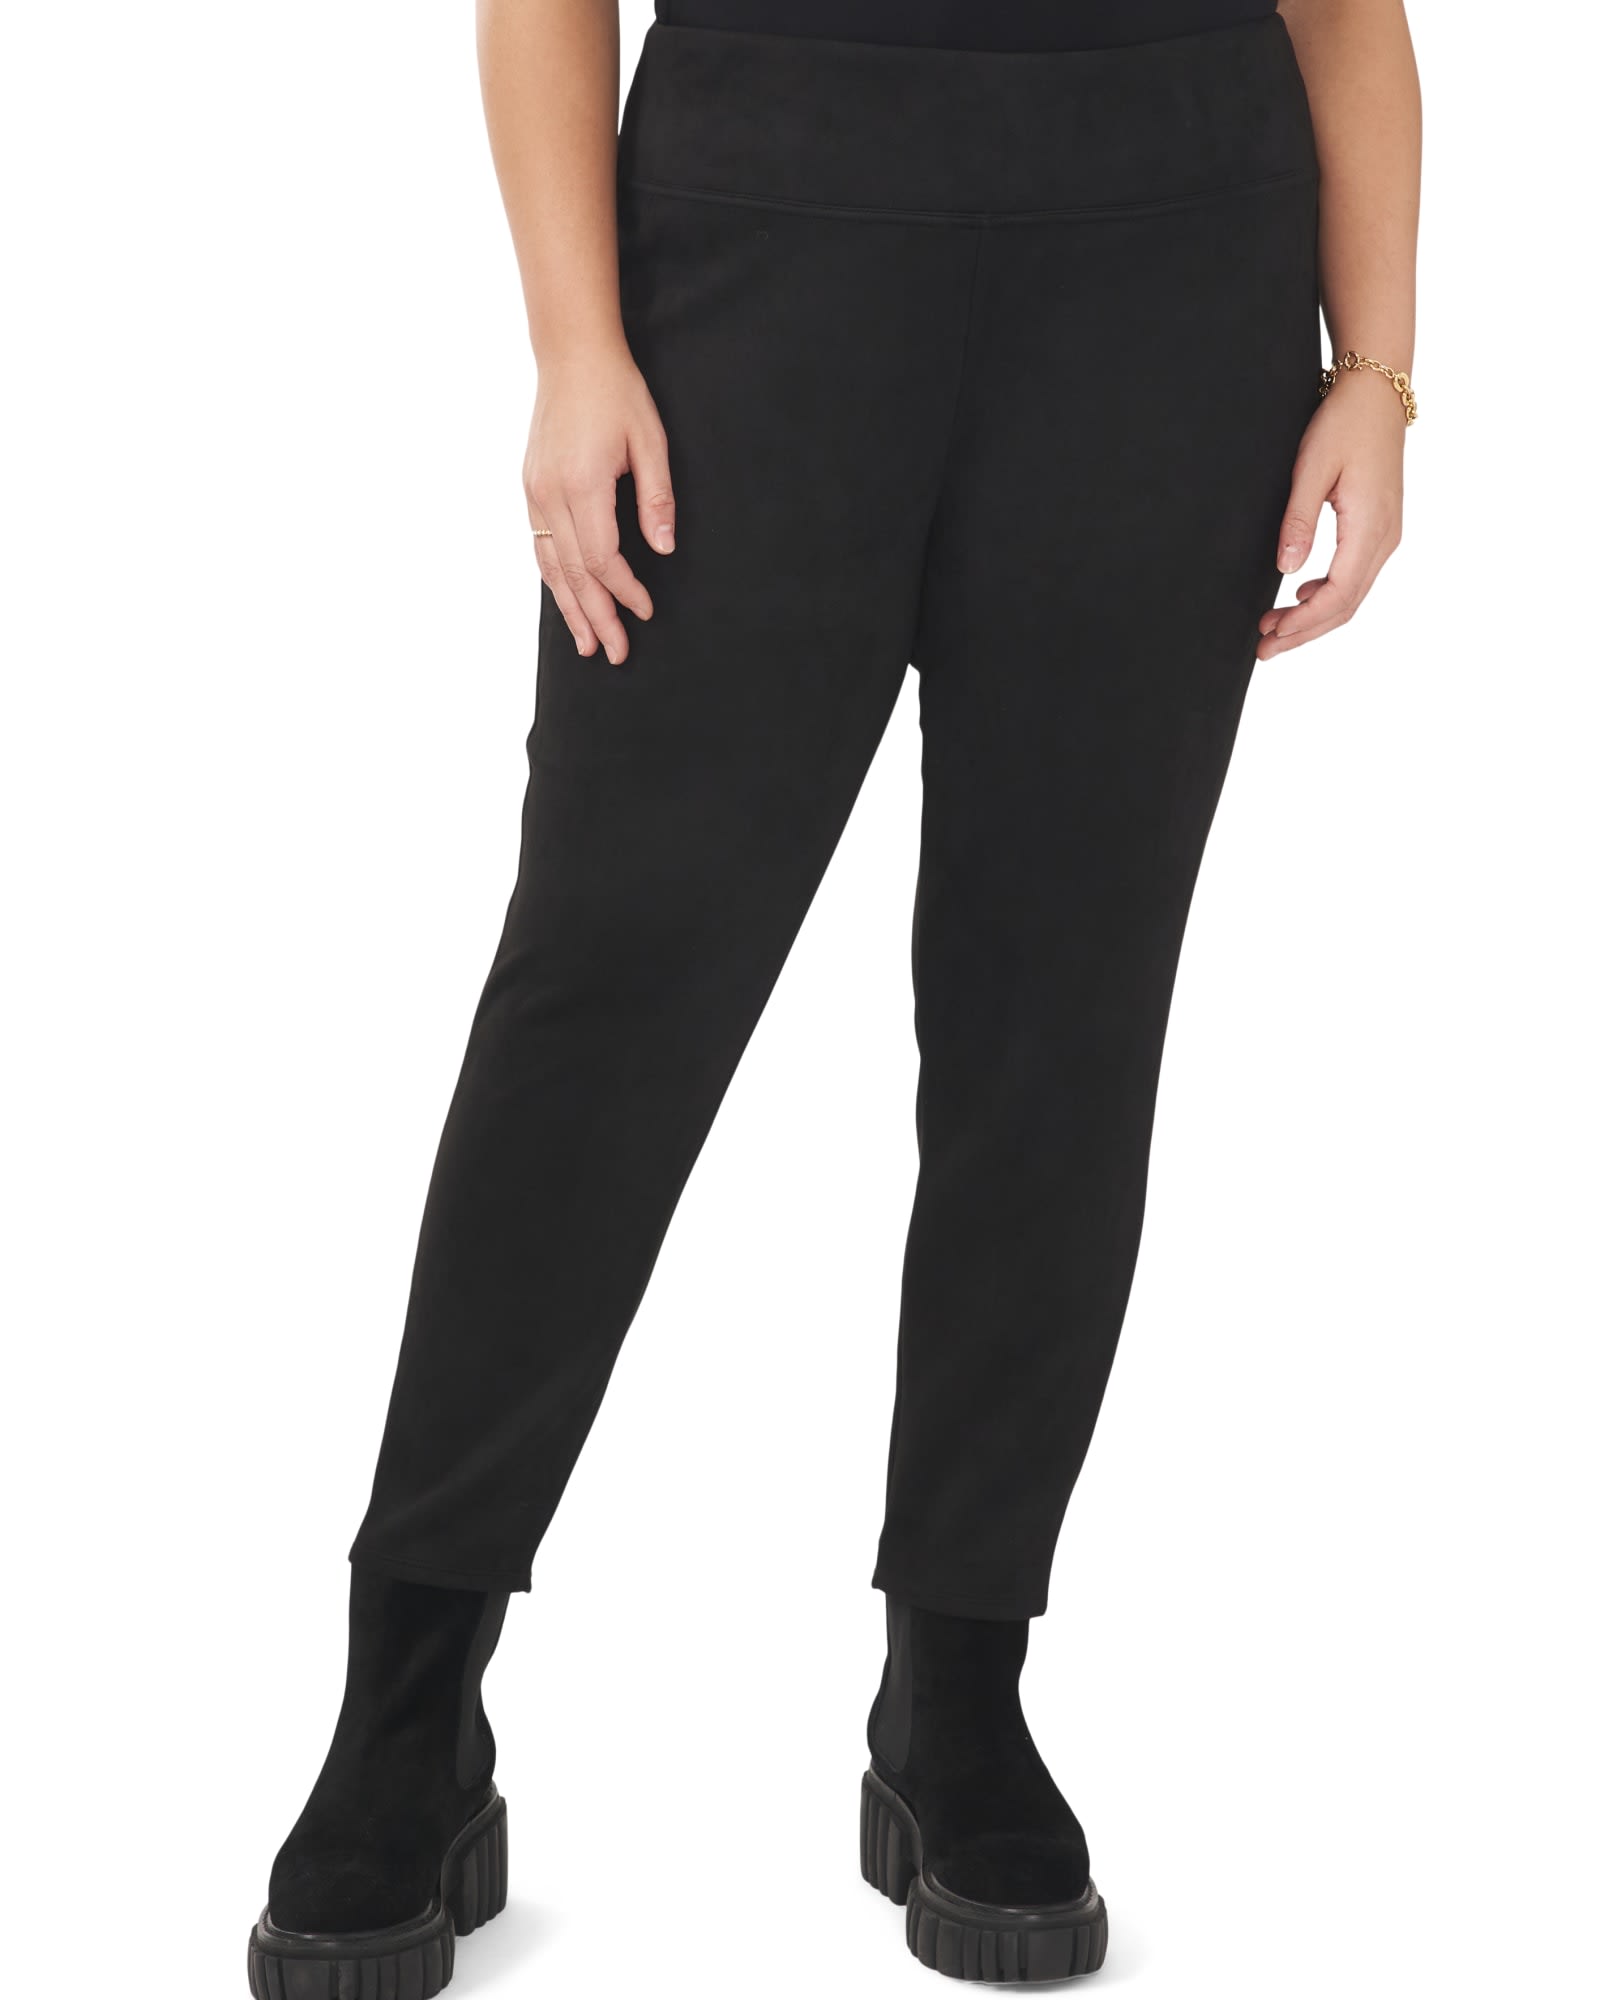 Terra & Sky Women's Plus Size 4X Fitted Legging Black Faux Leather Pull-On  New